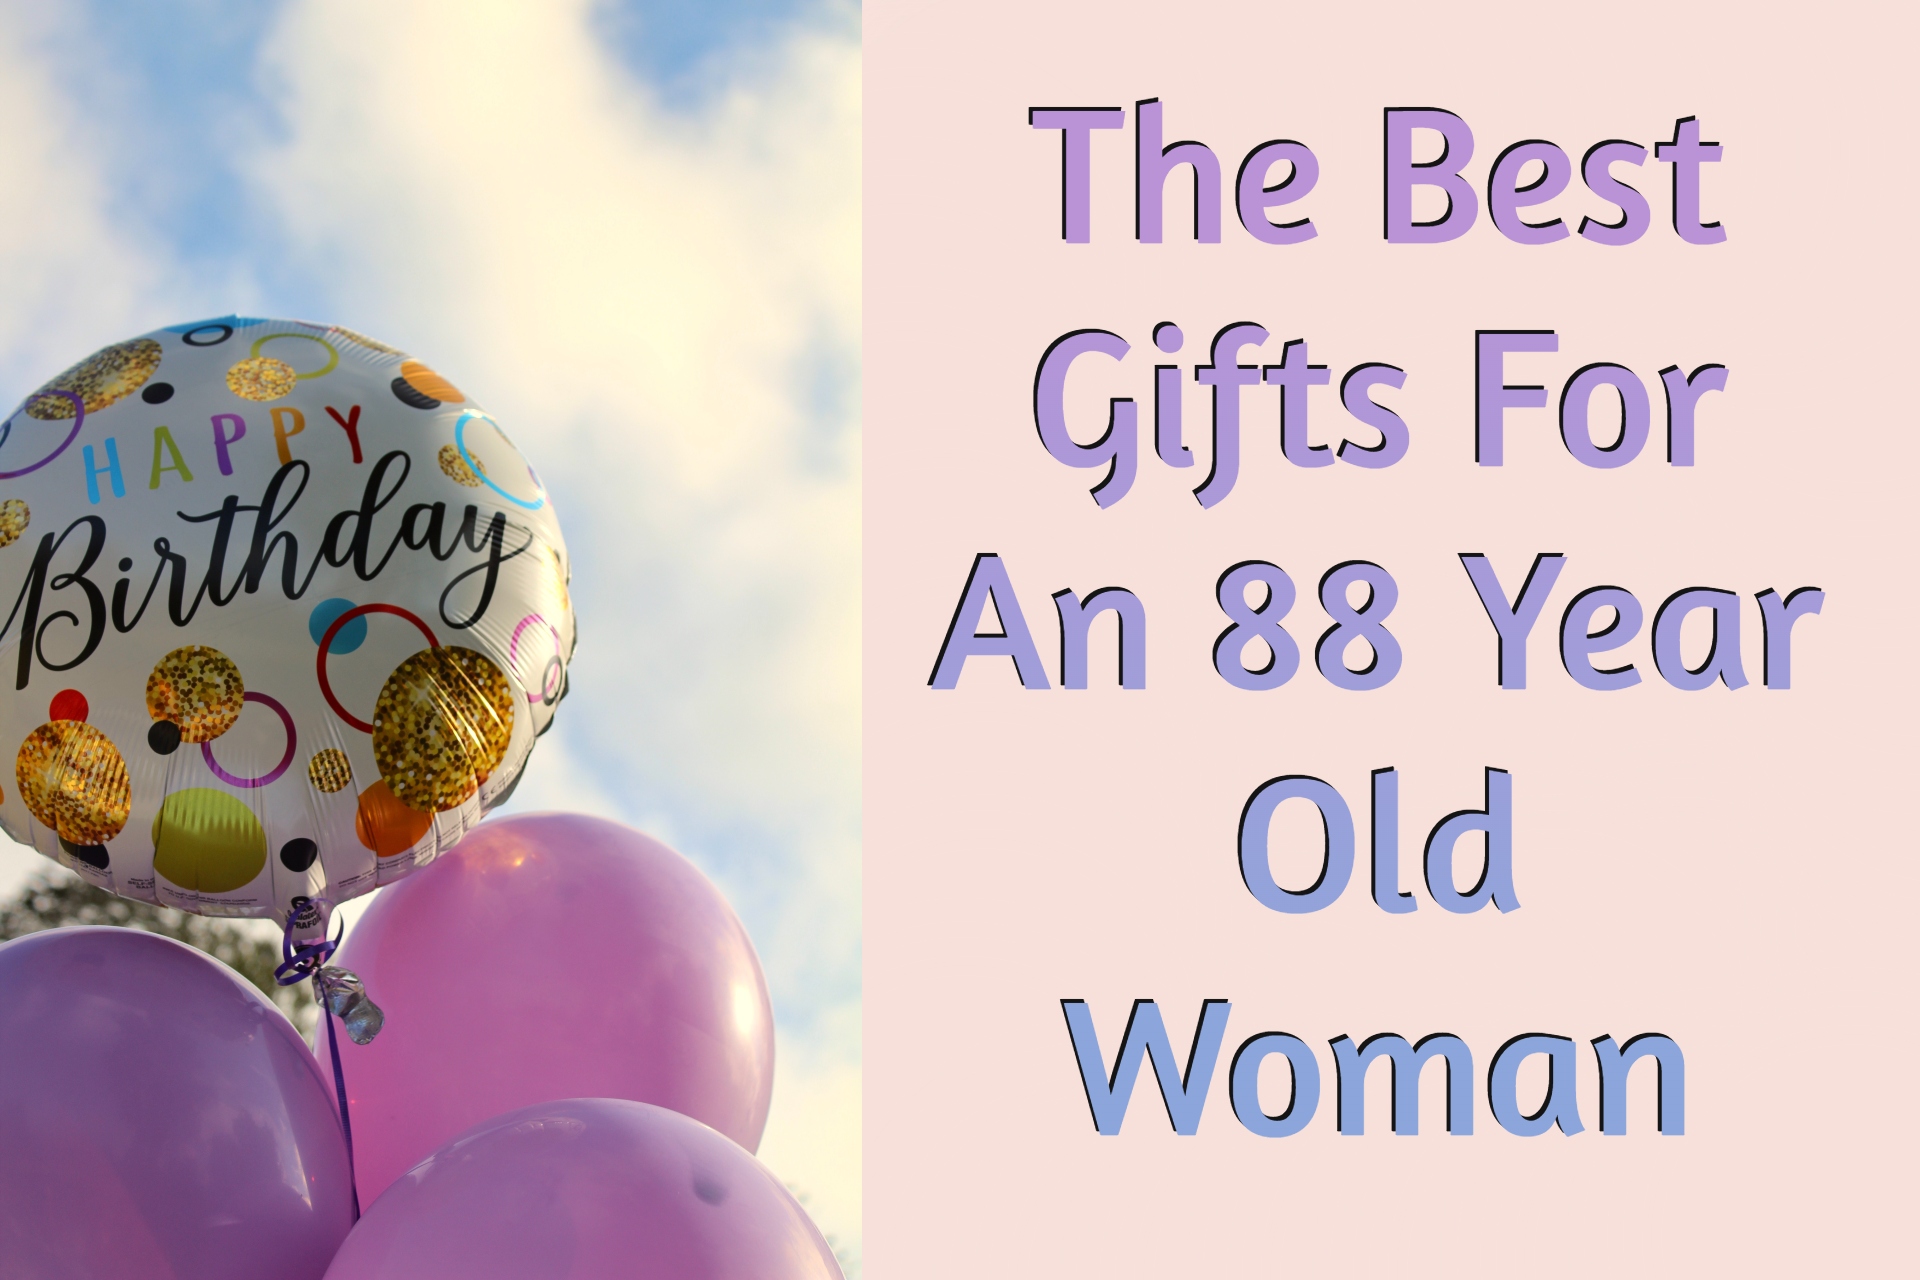 Cover image of gift ideas for 88-year-old woman by Giftsedge